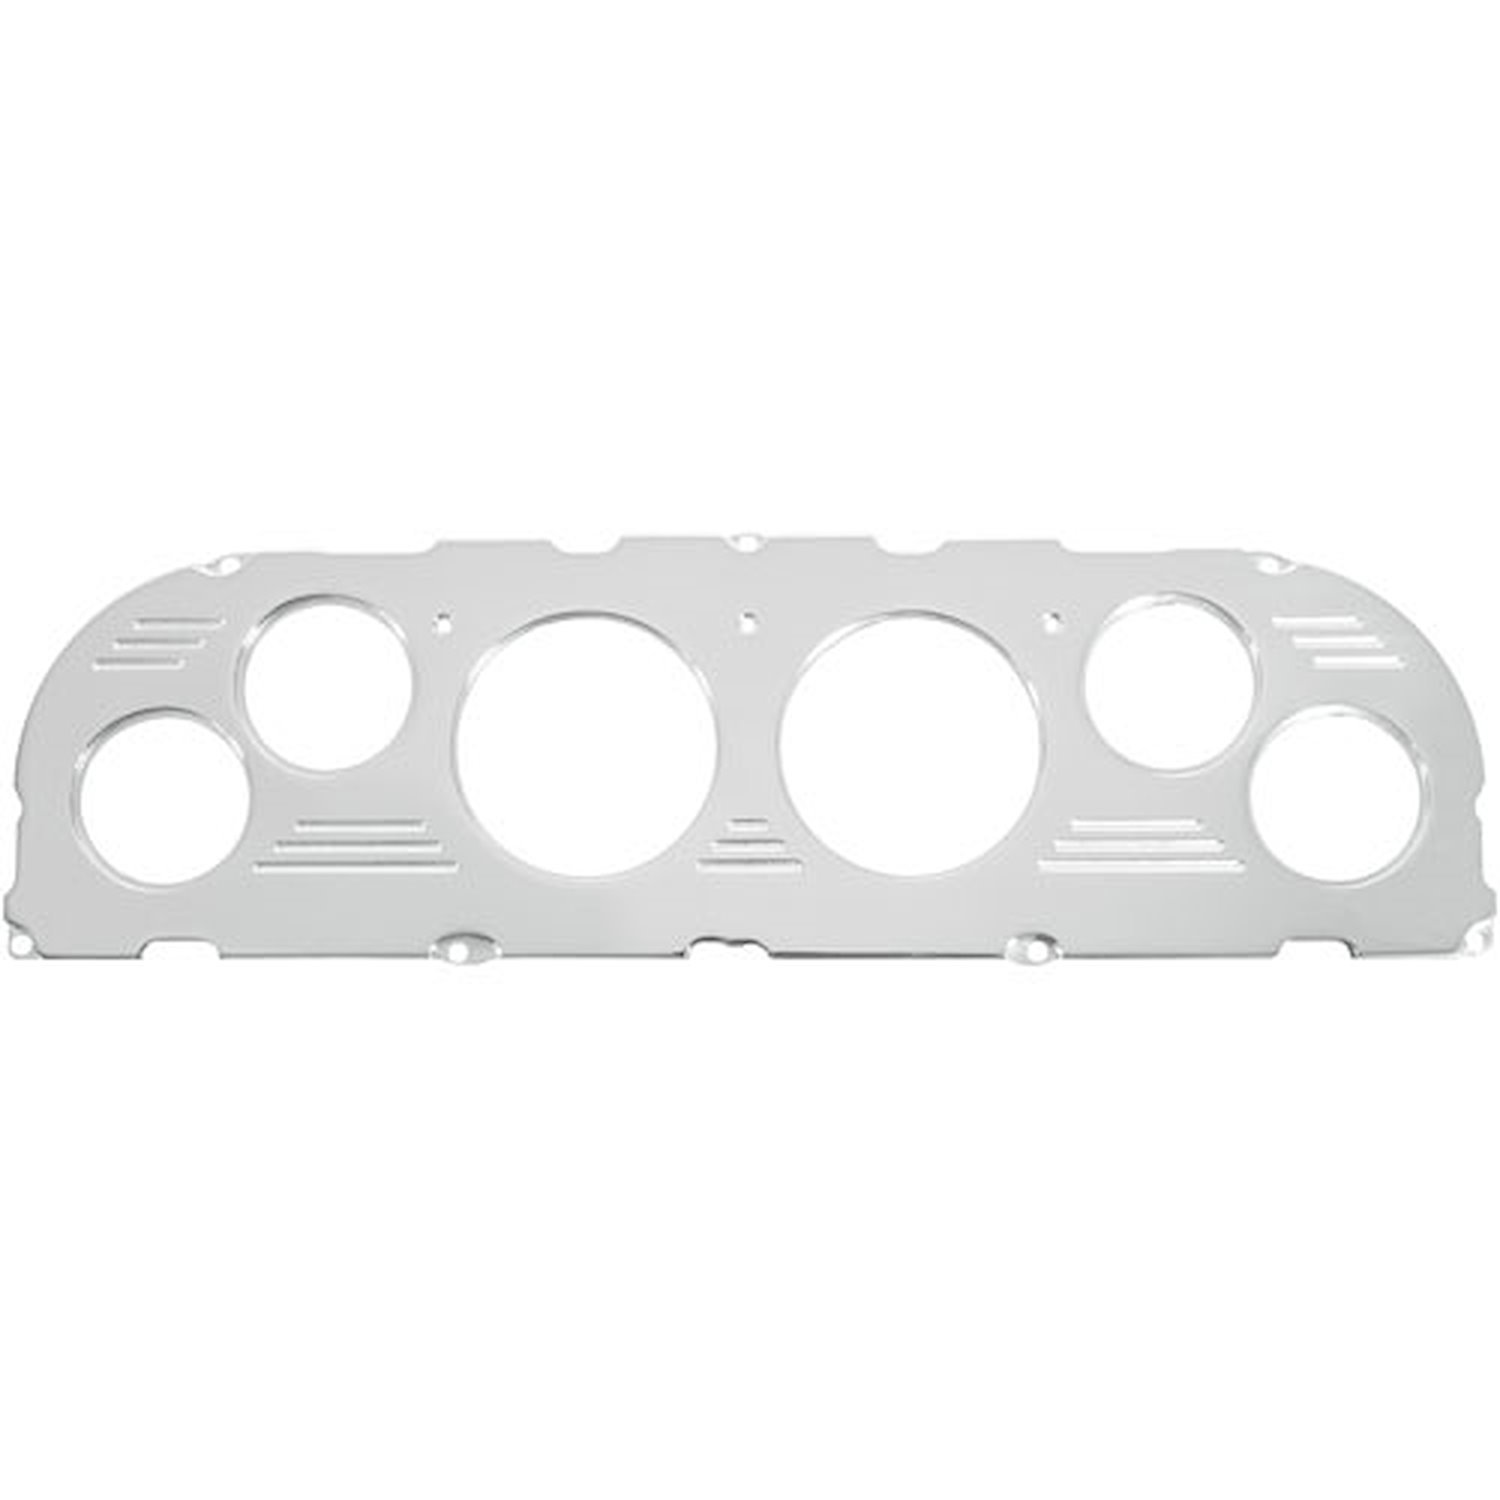 Direct-Fit Dash Panel 1960-63 Chevy Truck